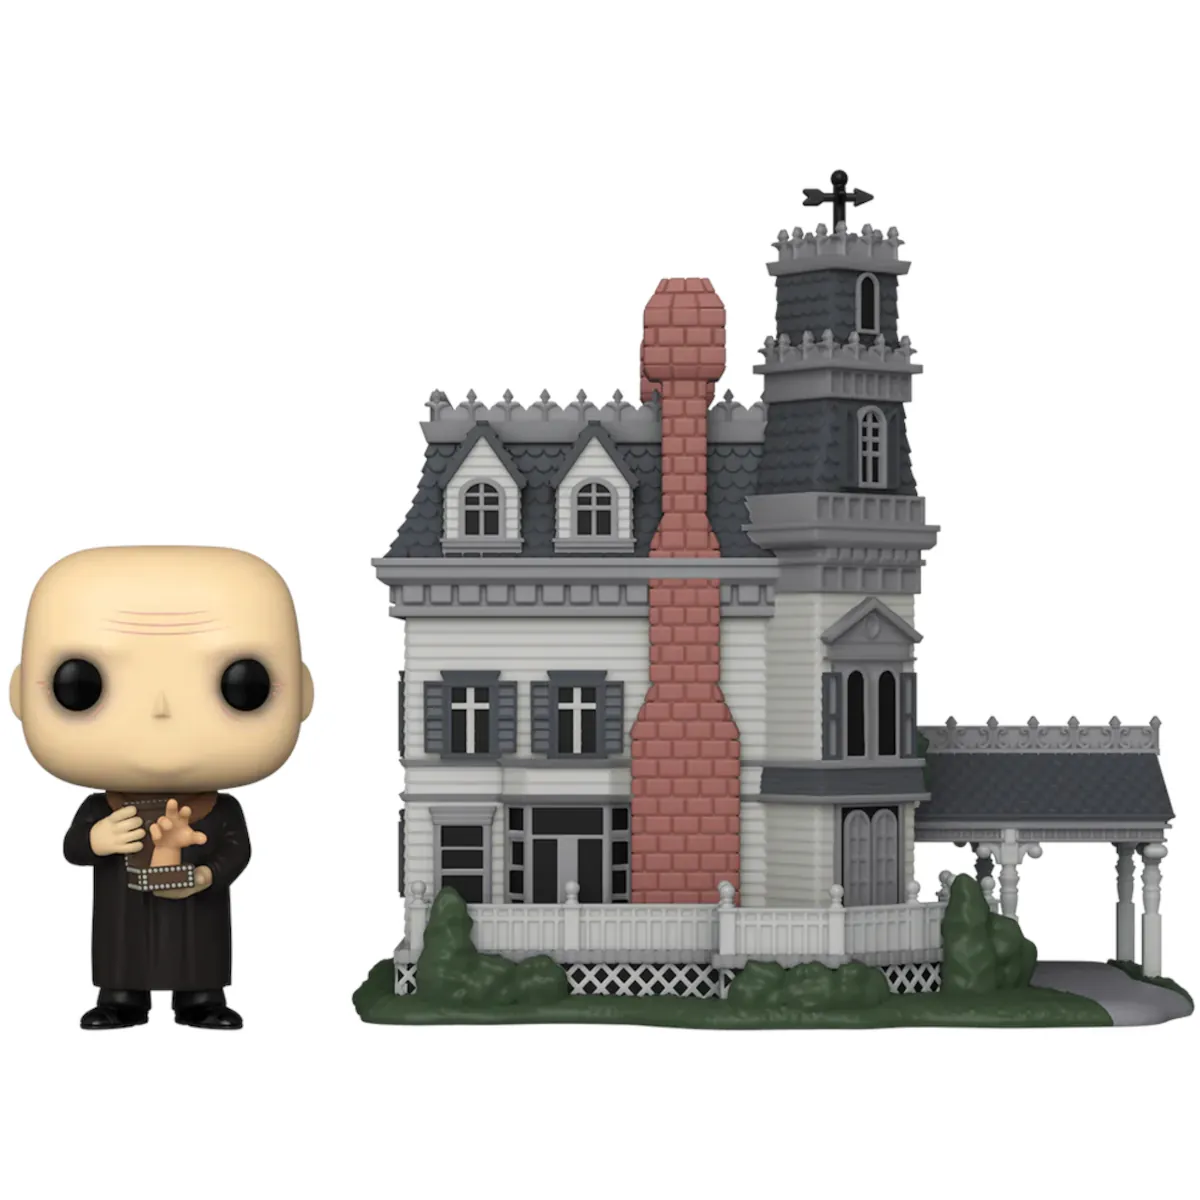 81208 Funko Pop! Town - The Addams Family - Uncle Fester & Addams Family Mansion Collectable Vinyl Figure